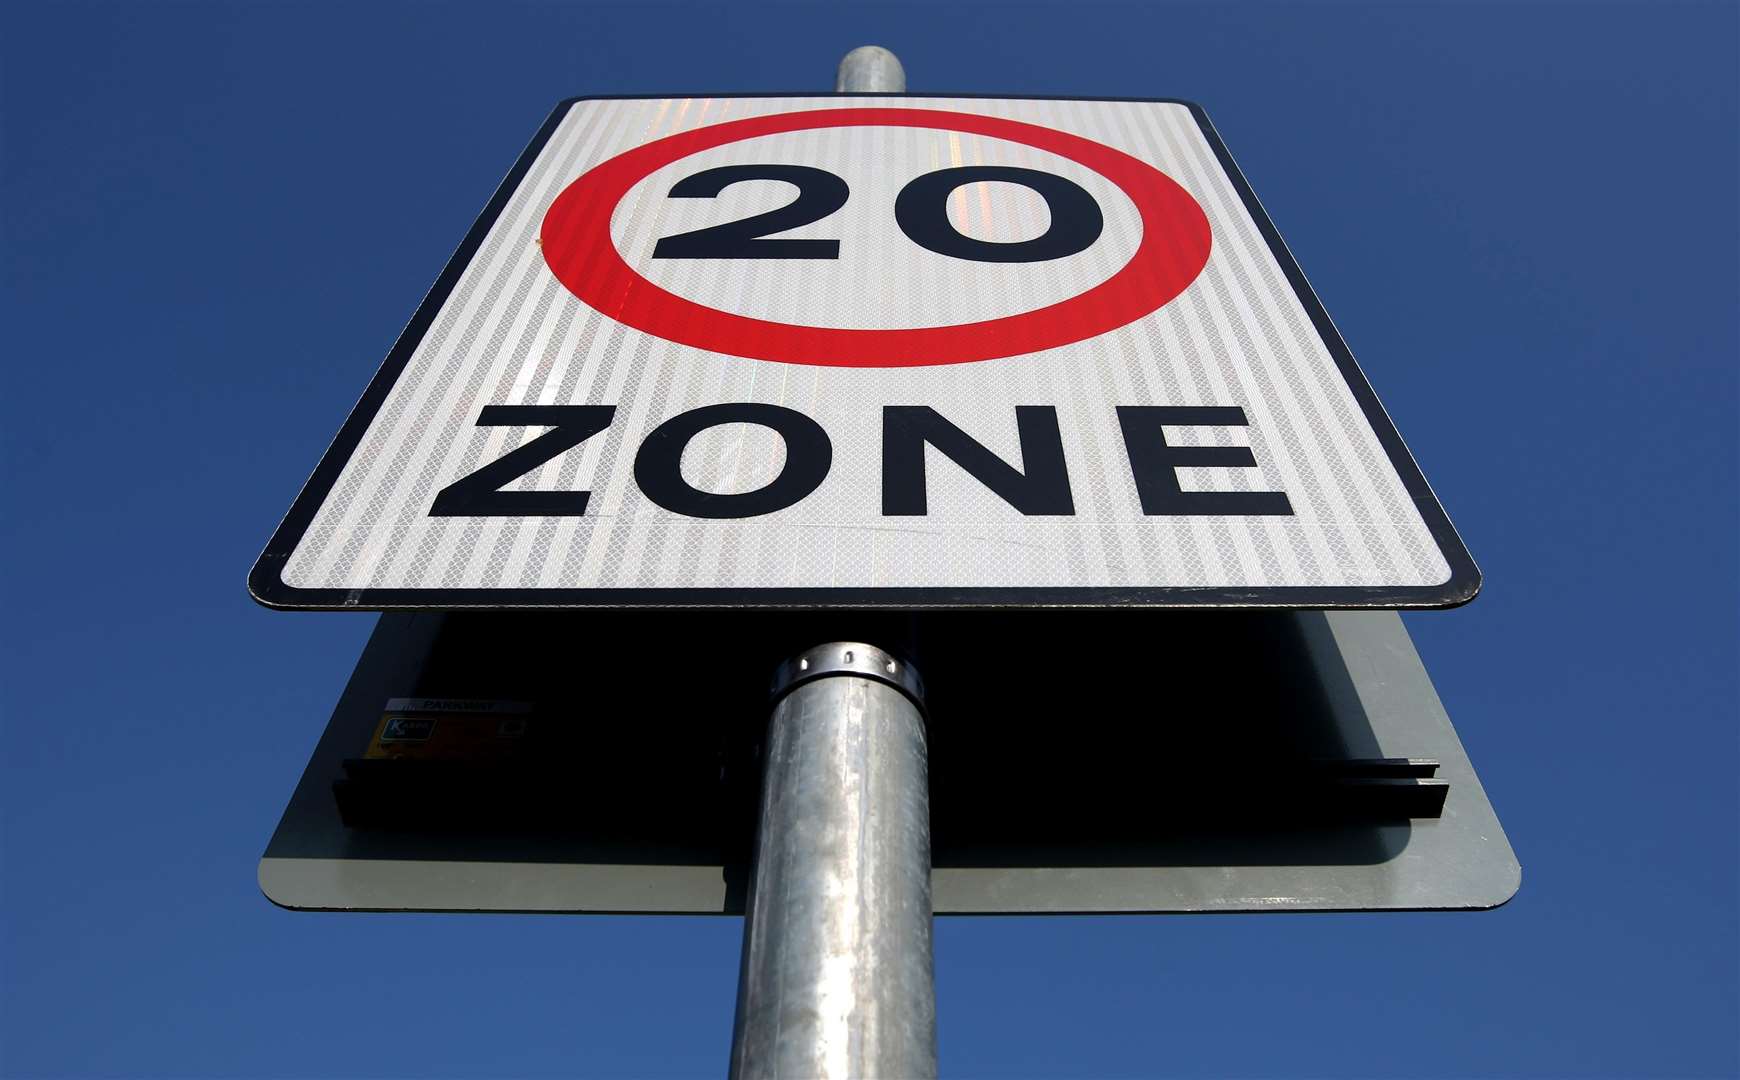 A petition is asking the Welsh Government to ‘rescind and remove the disastrous 20mph law’ (PA)